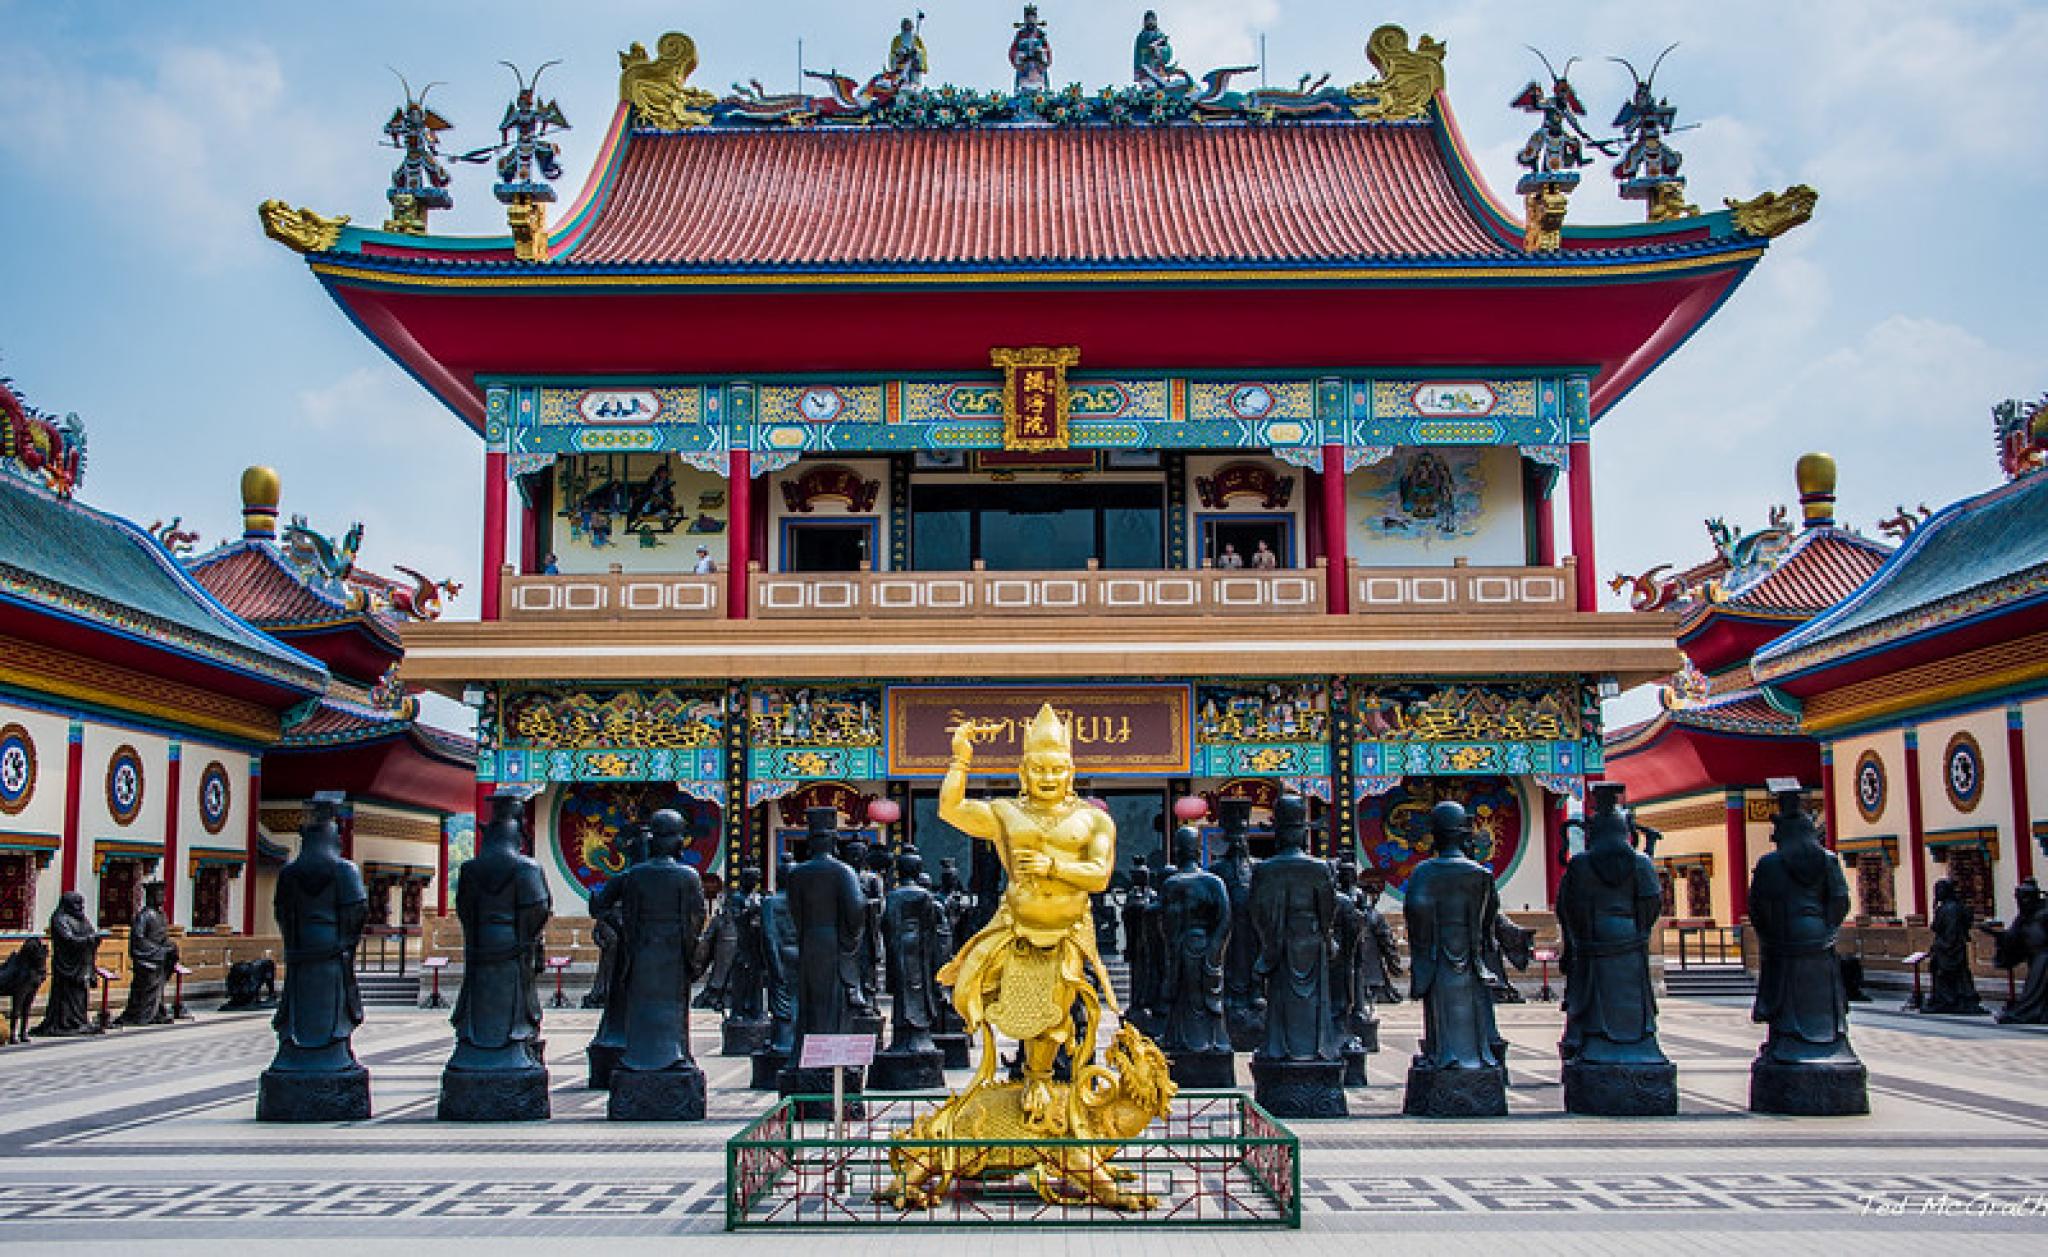 A view from Viharn Sien Anek Kuson Sala second floor. Bronze statues occupy an open-air courtyard, giving a sense of grandeour and magnificence. In the centre stand statues representing Chinese folklore.